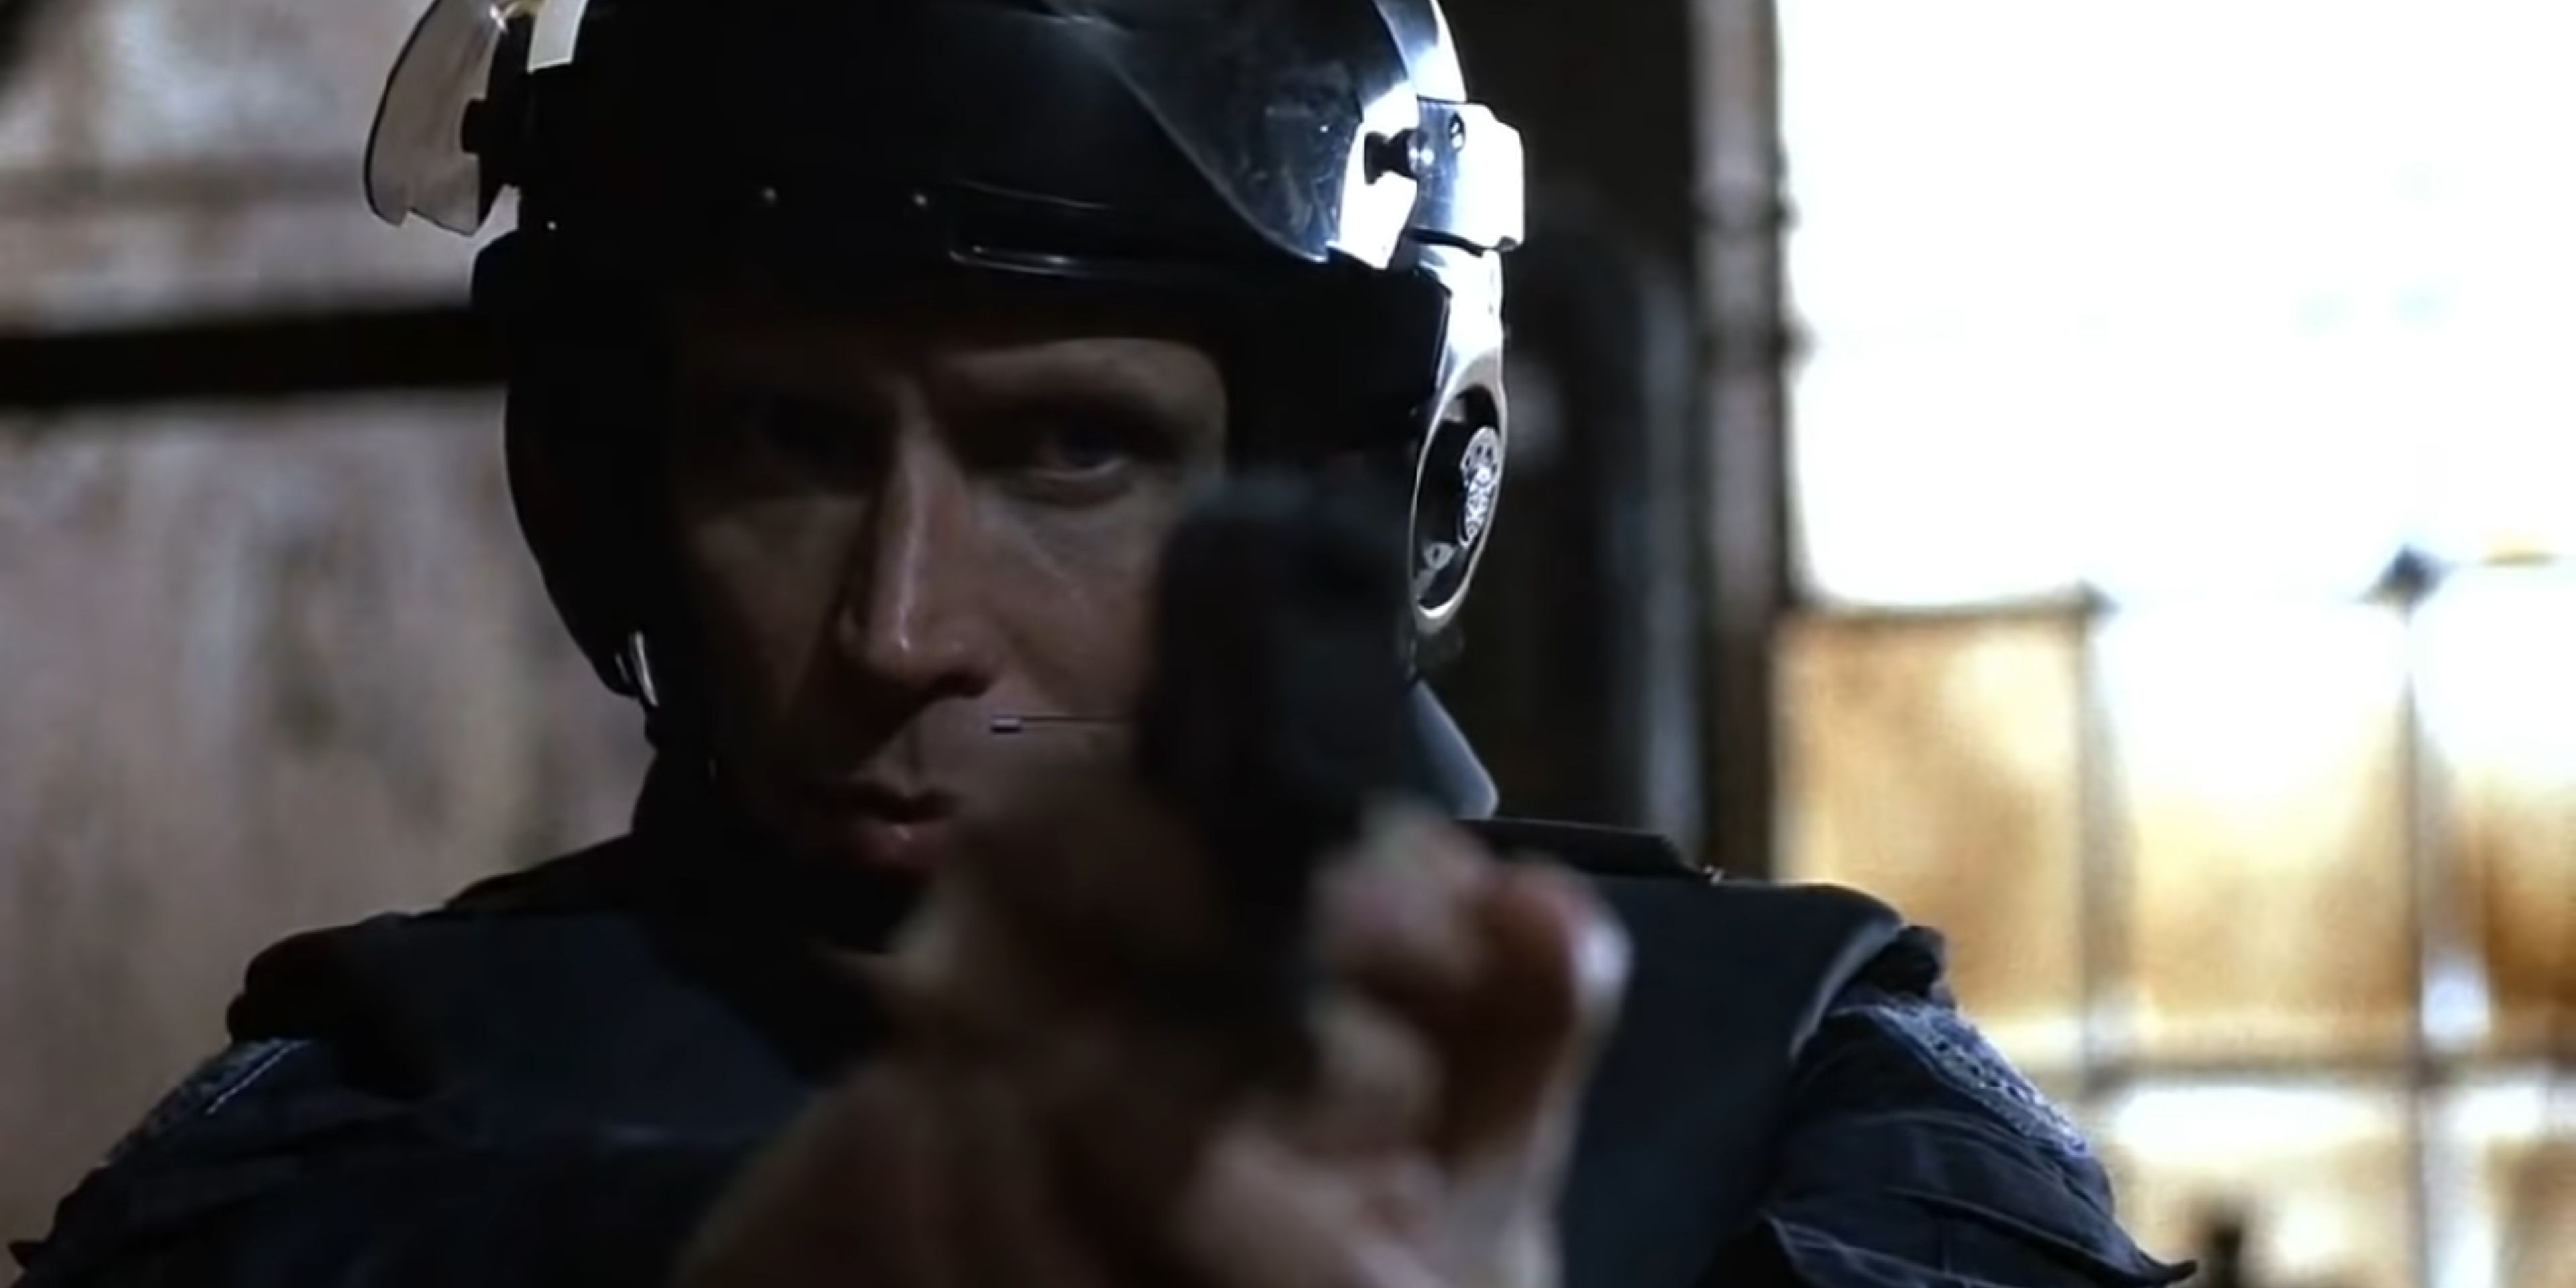 "Dead Or Alive, You're Coming With Me" - Alex Murphy, RoboCop (1987)